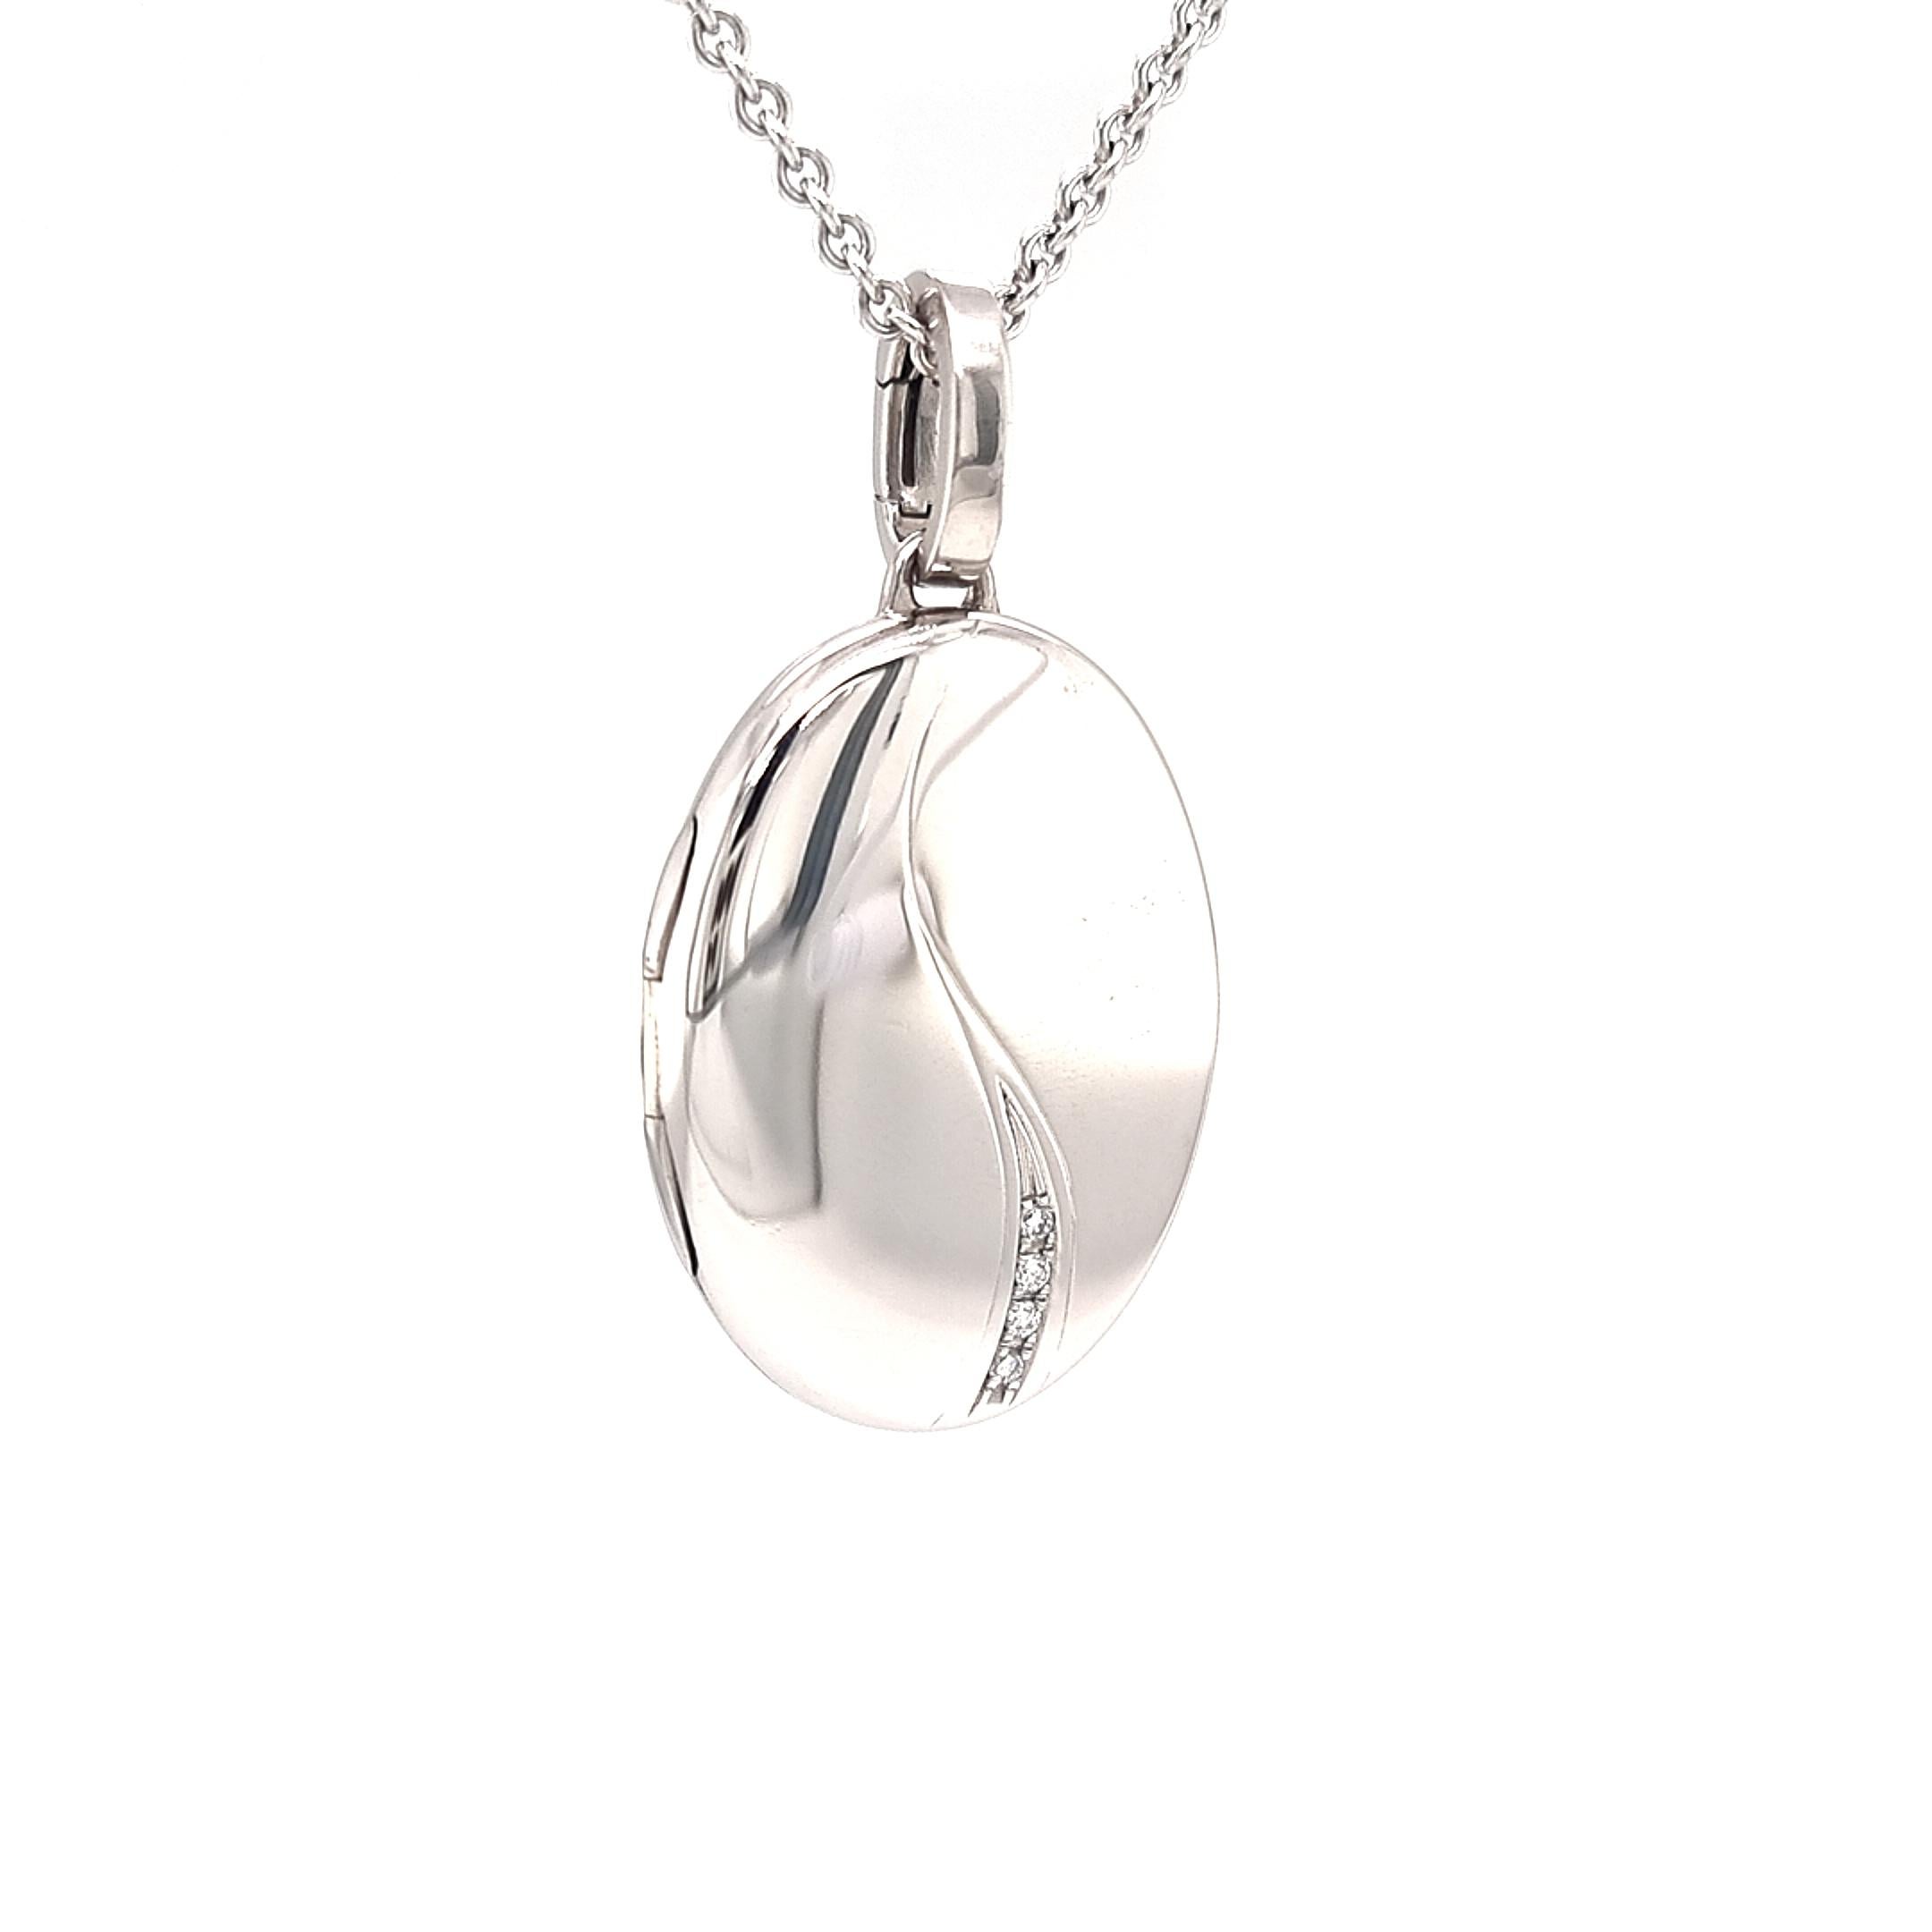 Oval locket pendant, Hallmark Collection by VICTOR MAYER, 18k white gold, solid version, 4 diamonds, total 0.04 ct, H VS with two picture frames, made in Germany

About the creator Victor Mayer
Victor Mayer is internationally renowned for elegant